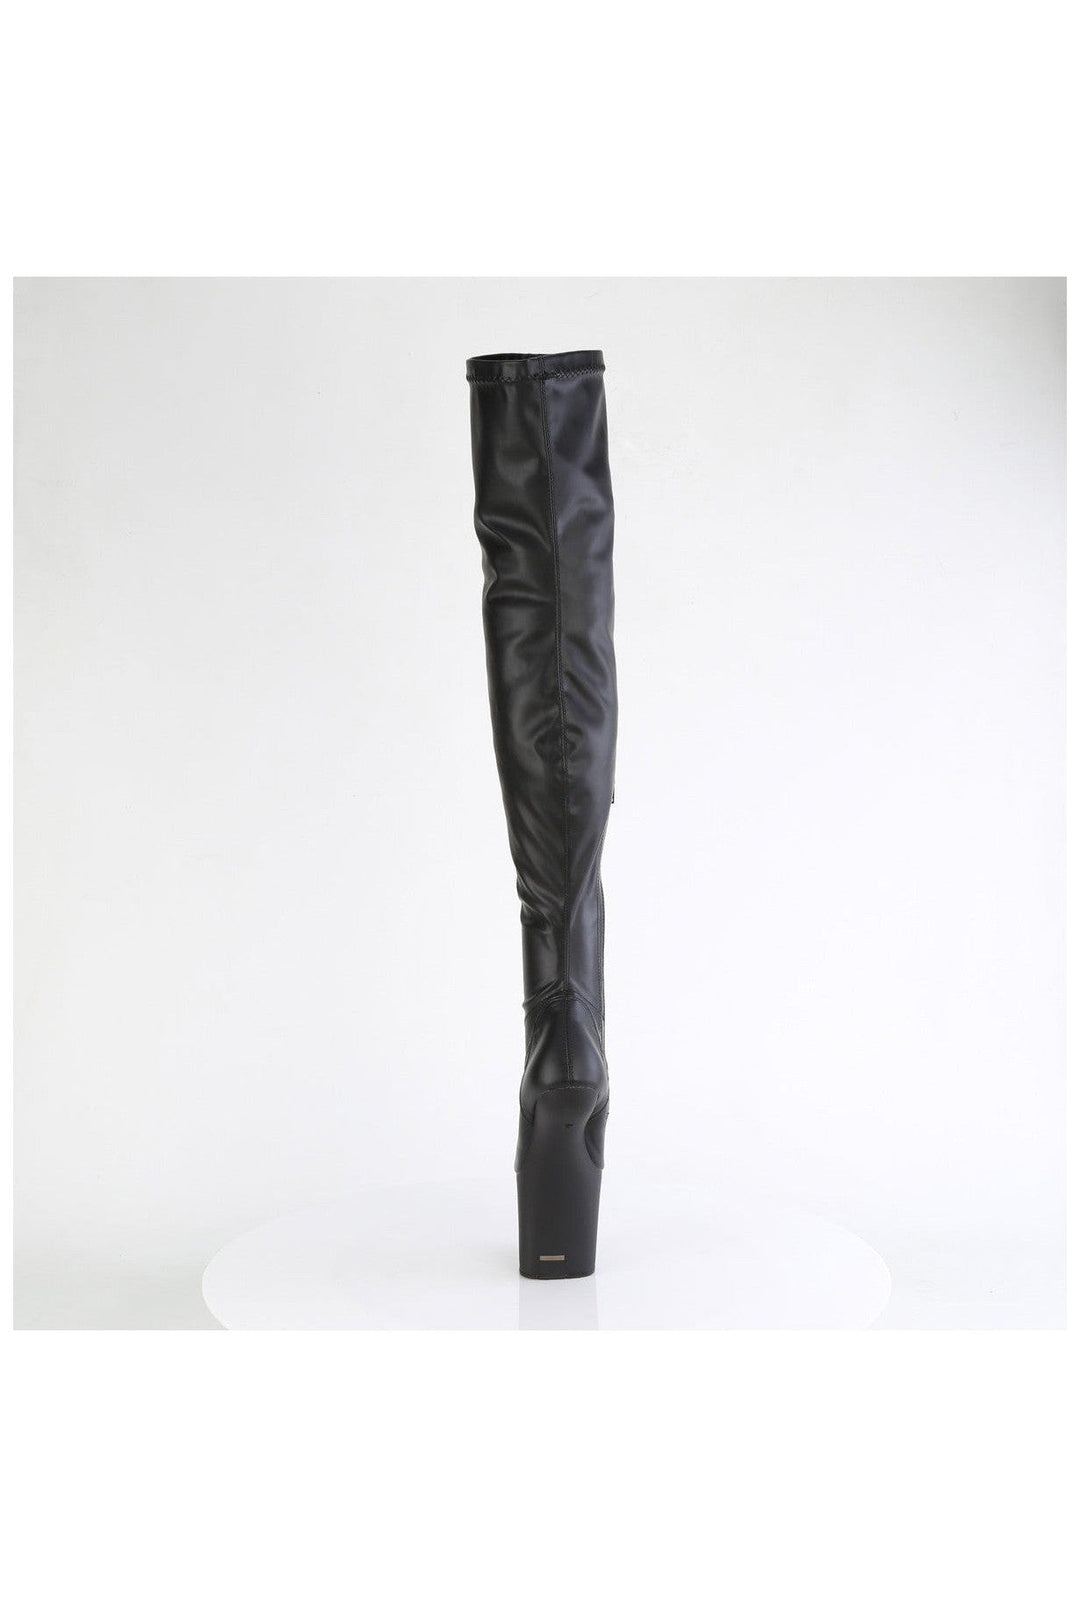 CRAZE-3000 Black Faux Leather Thigh Boot-Thigh Boots- Stripper Shoes at SEXYSHOES.COM